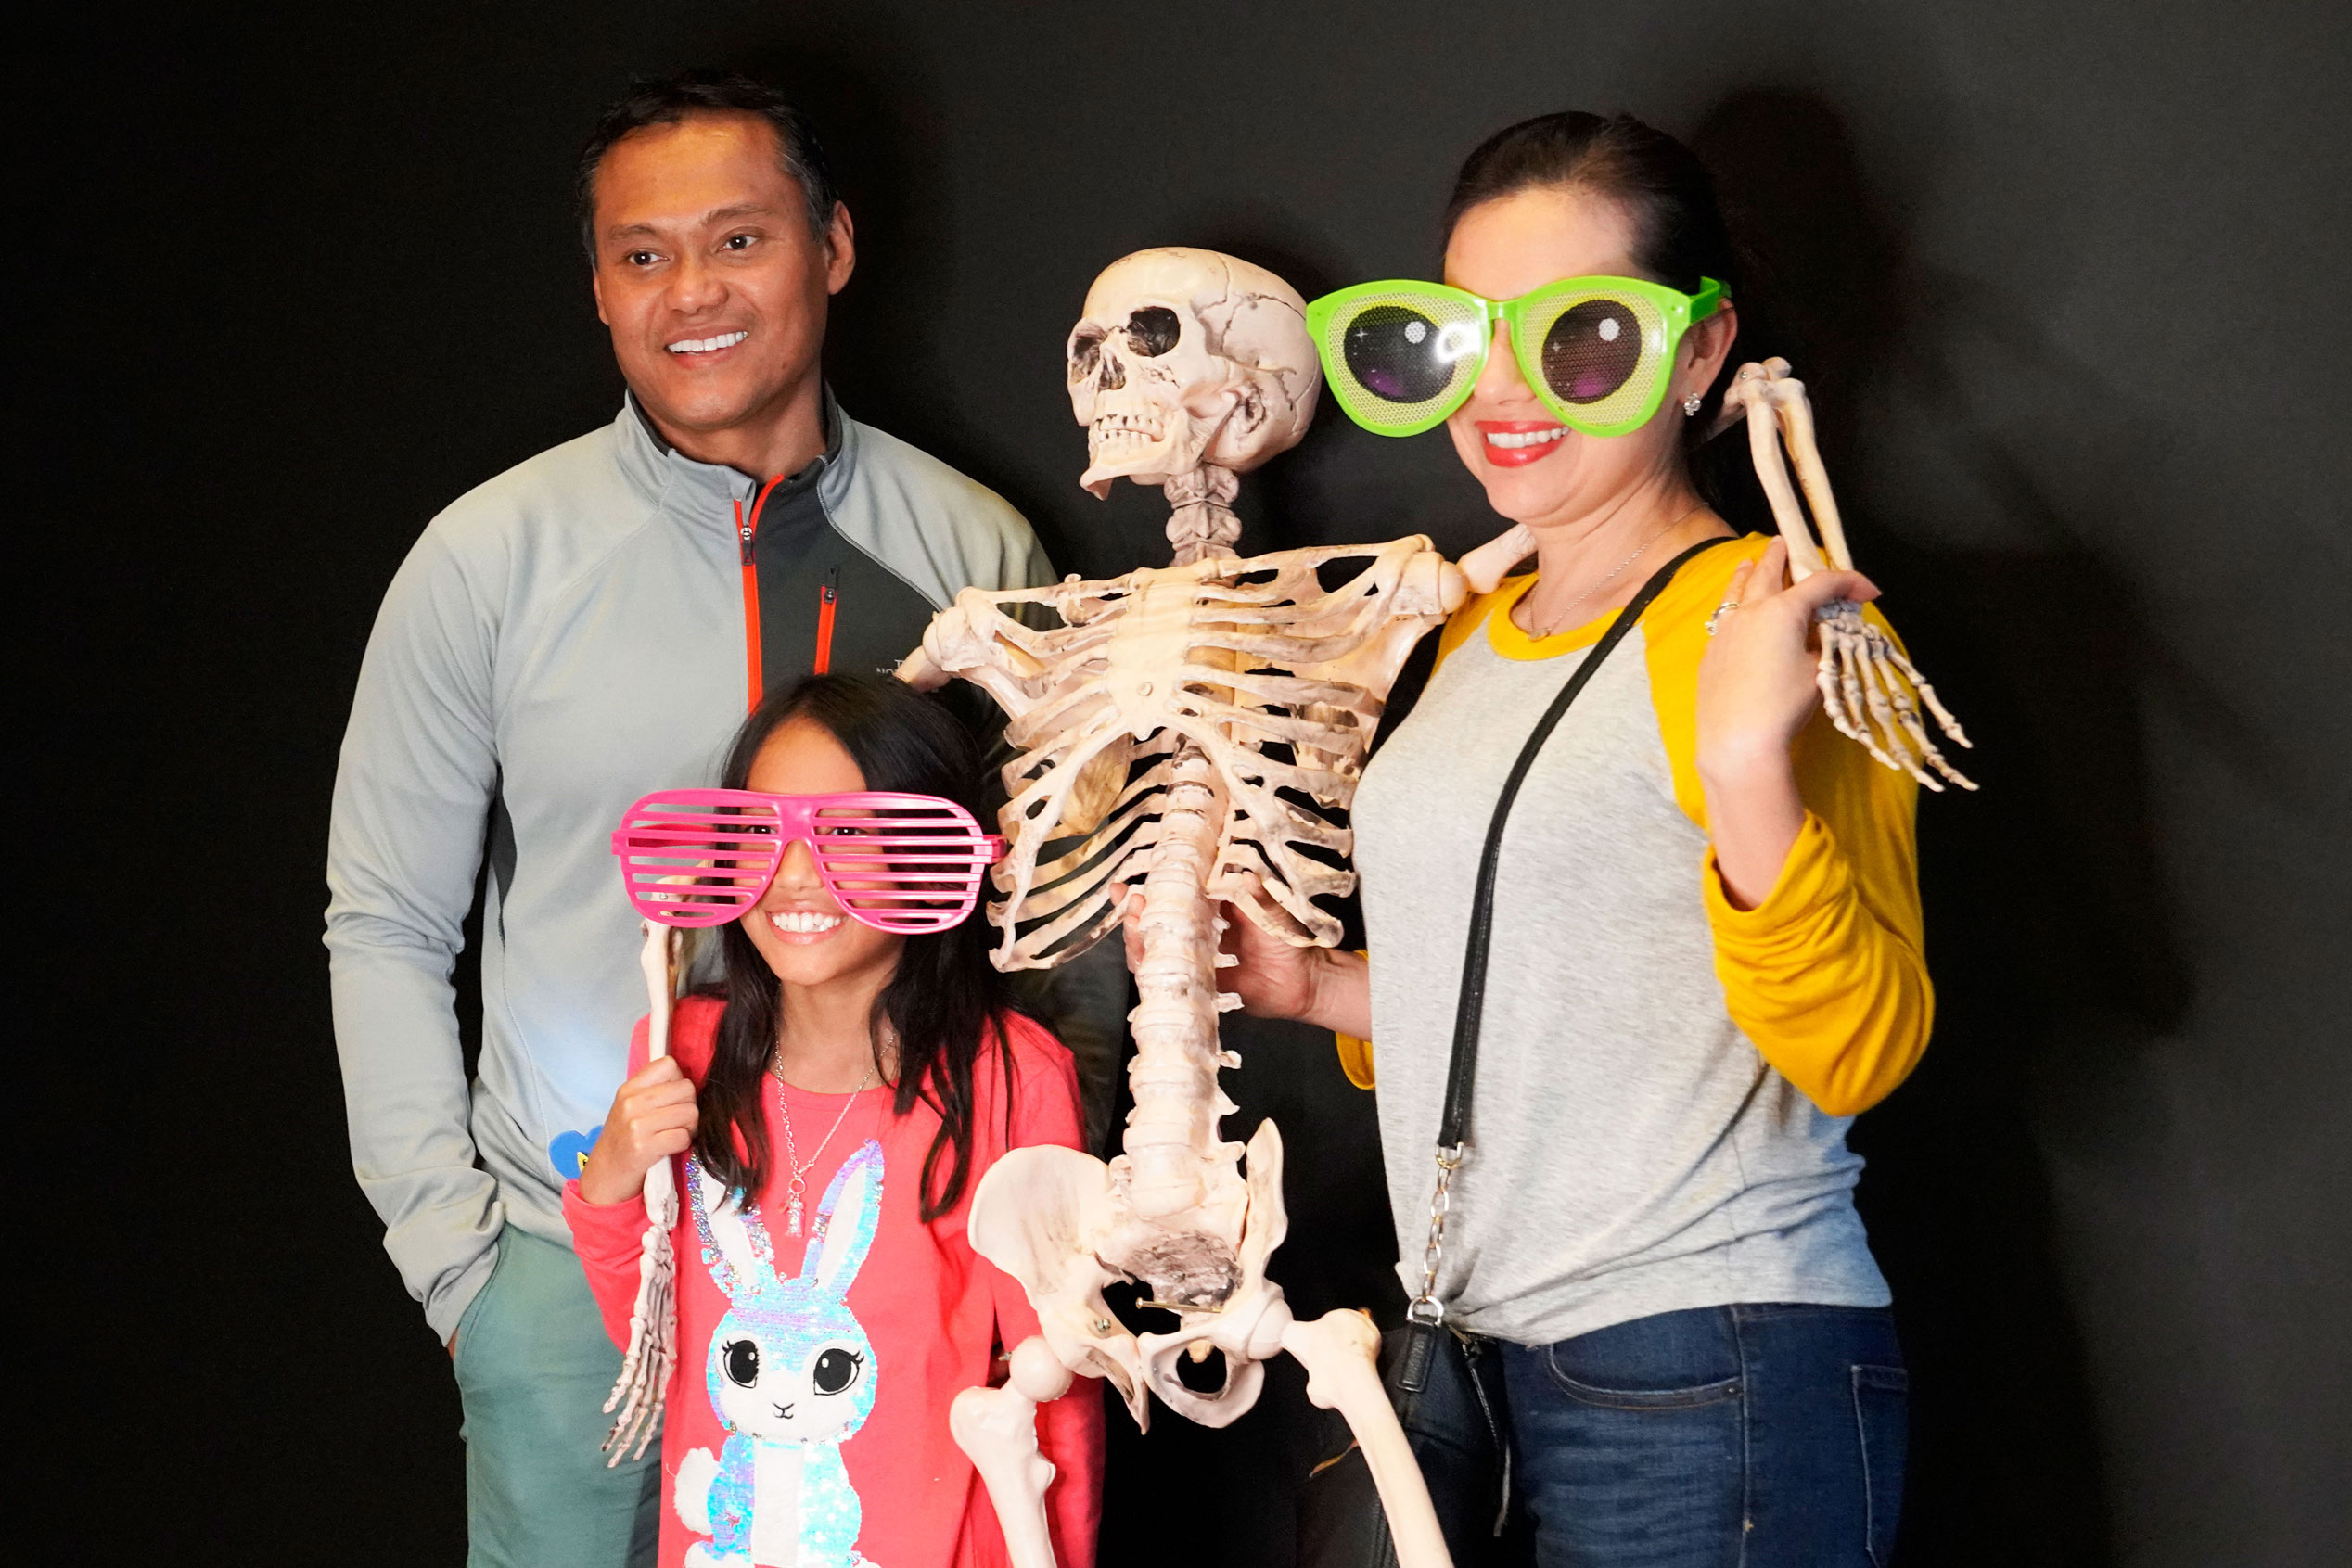 Families strike a spooky pose with Say Cheese photobooth during Spooktacular at the Bullock Museum.